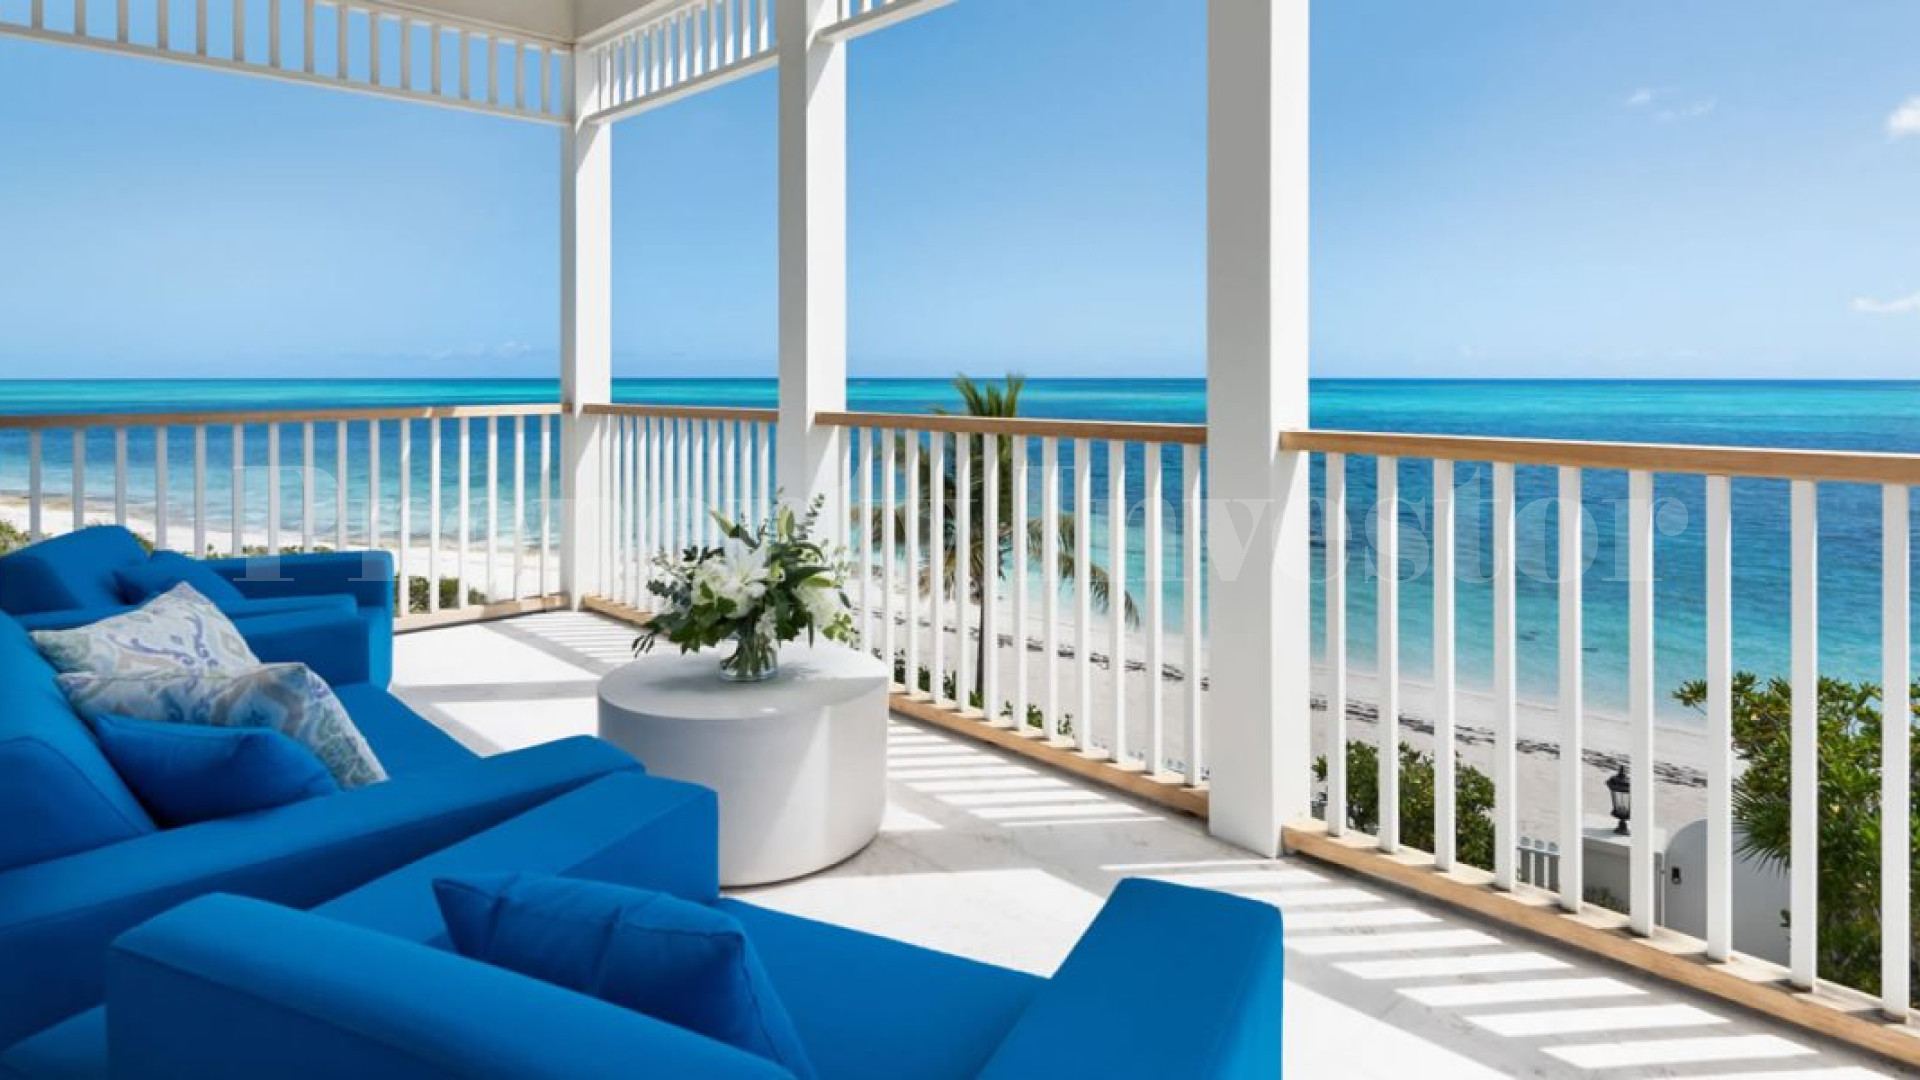 Fabulous 5 Bedroom Colonial Style Beachfront Home for Sale in Turks & Caicos